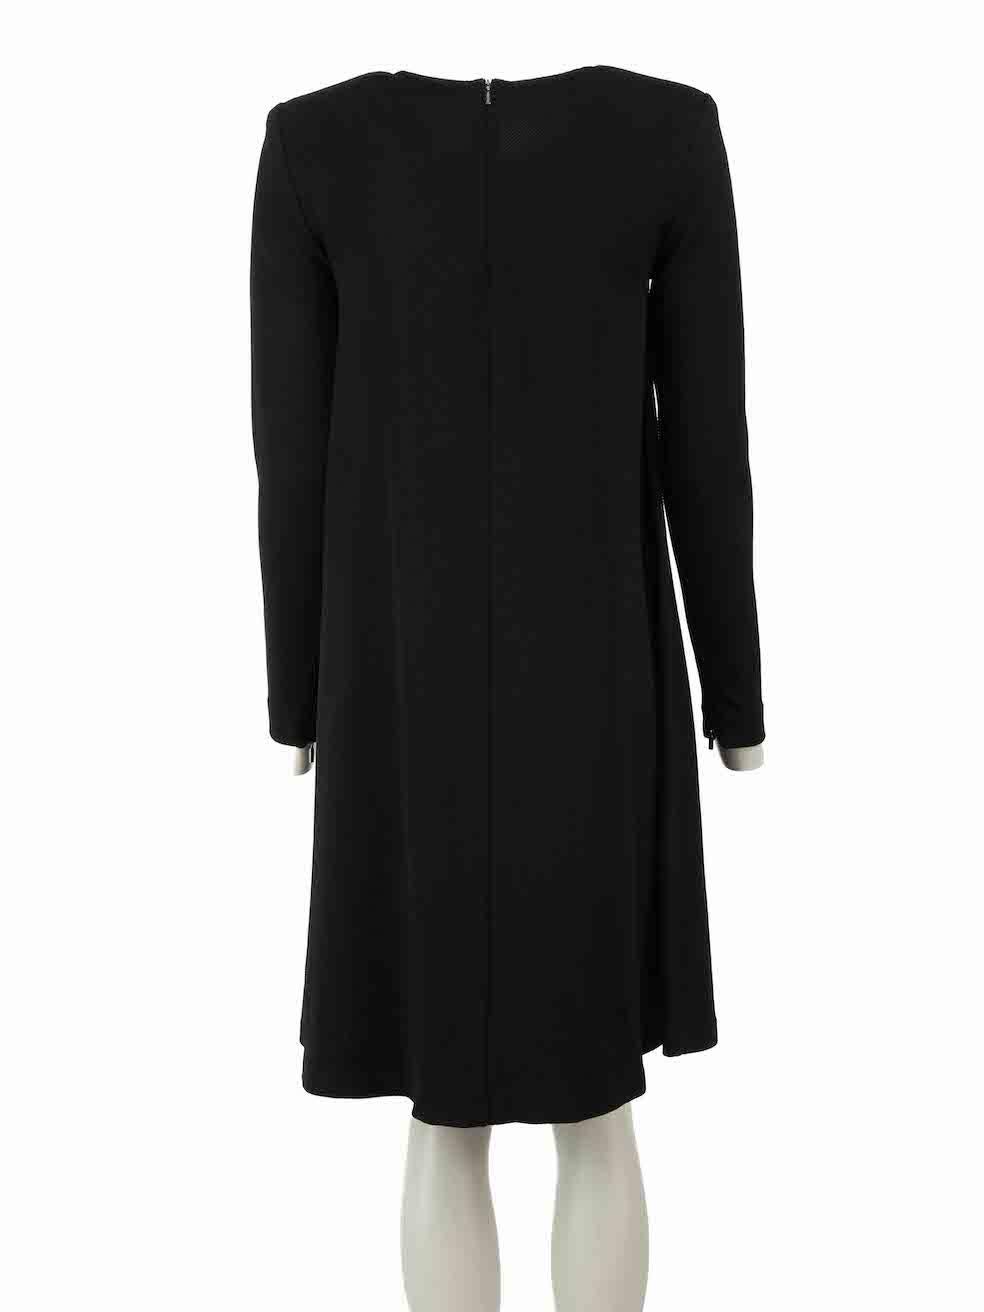 Max Mara Black Striped Texture Long Sleeve Dress Size XS In Excellent Condition For Sale In London, GB